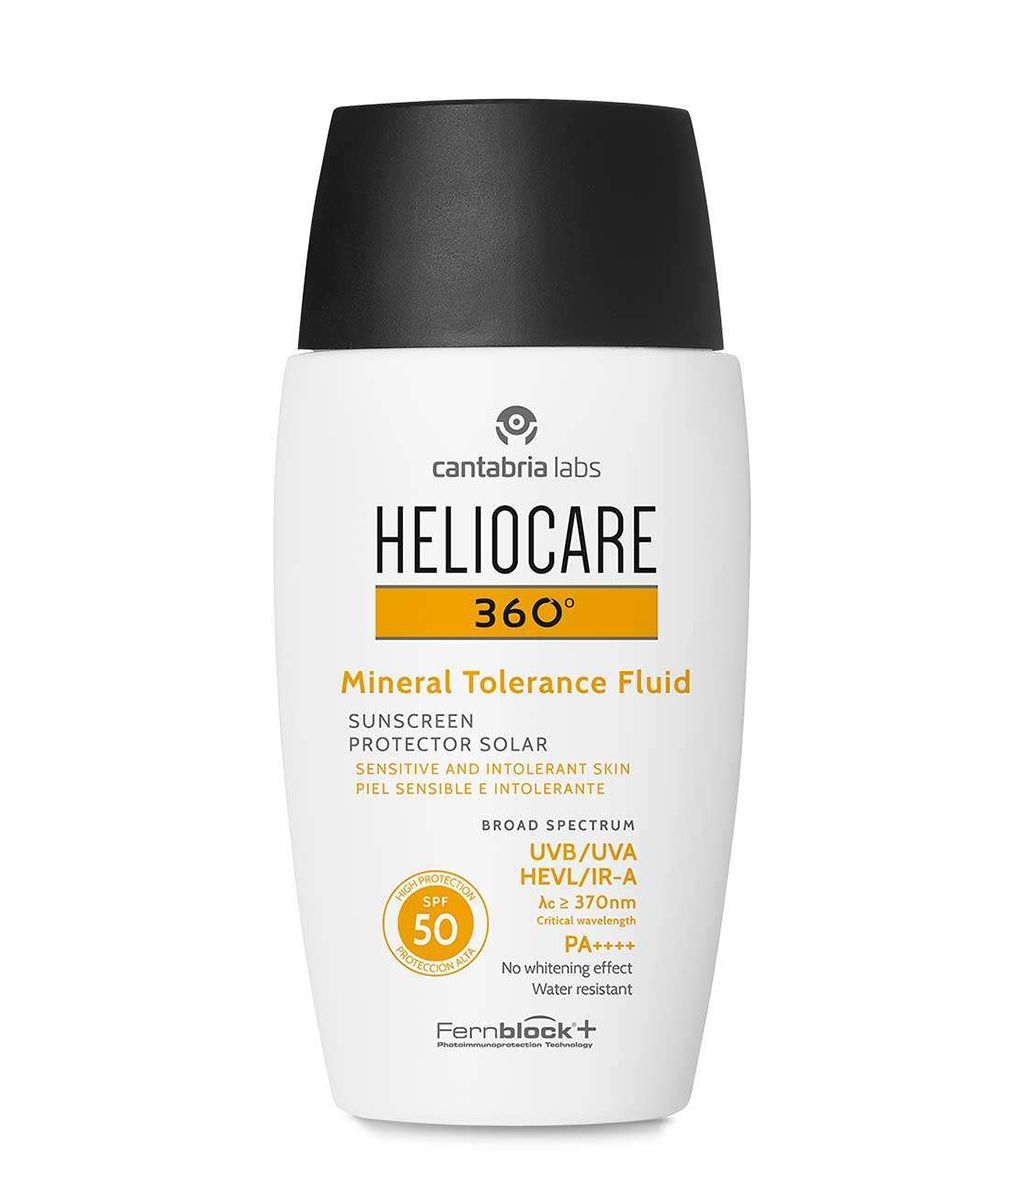 cantabria labs heliocare 360 mineral tolerance fluid spf50